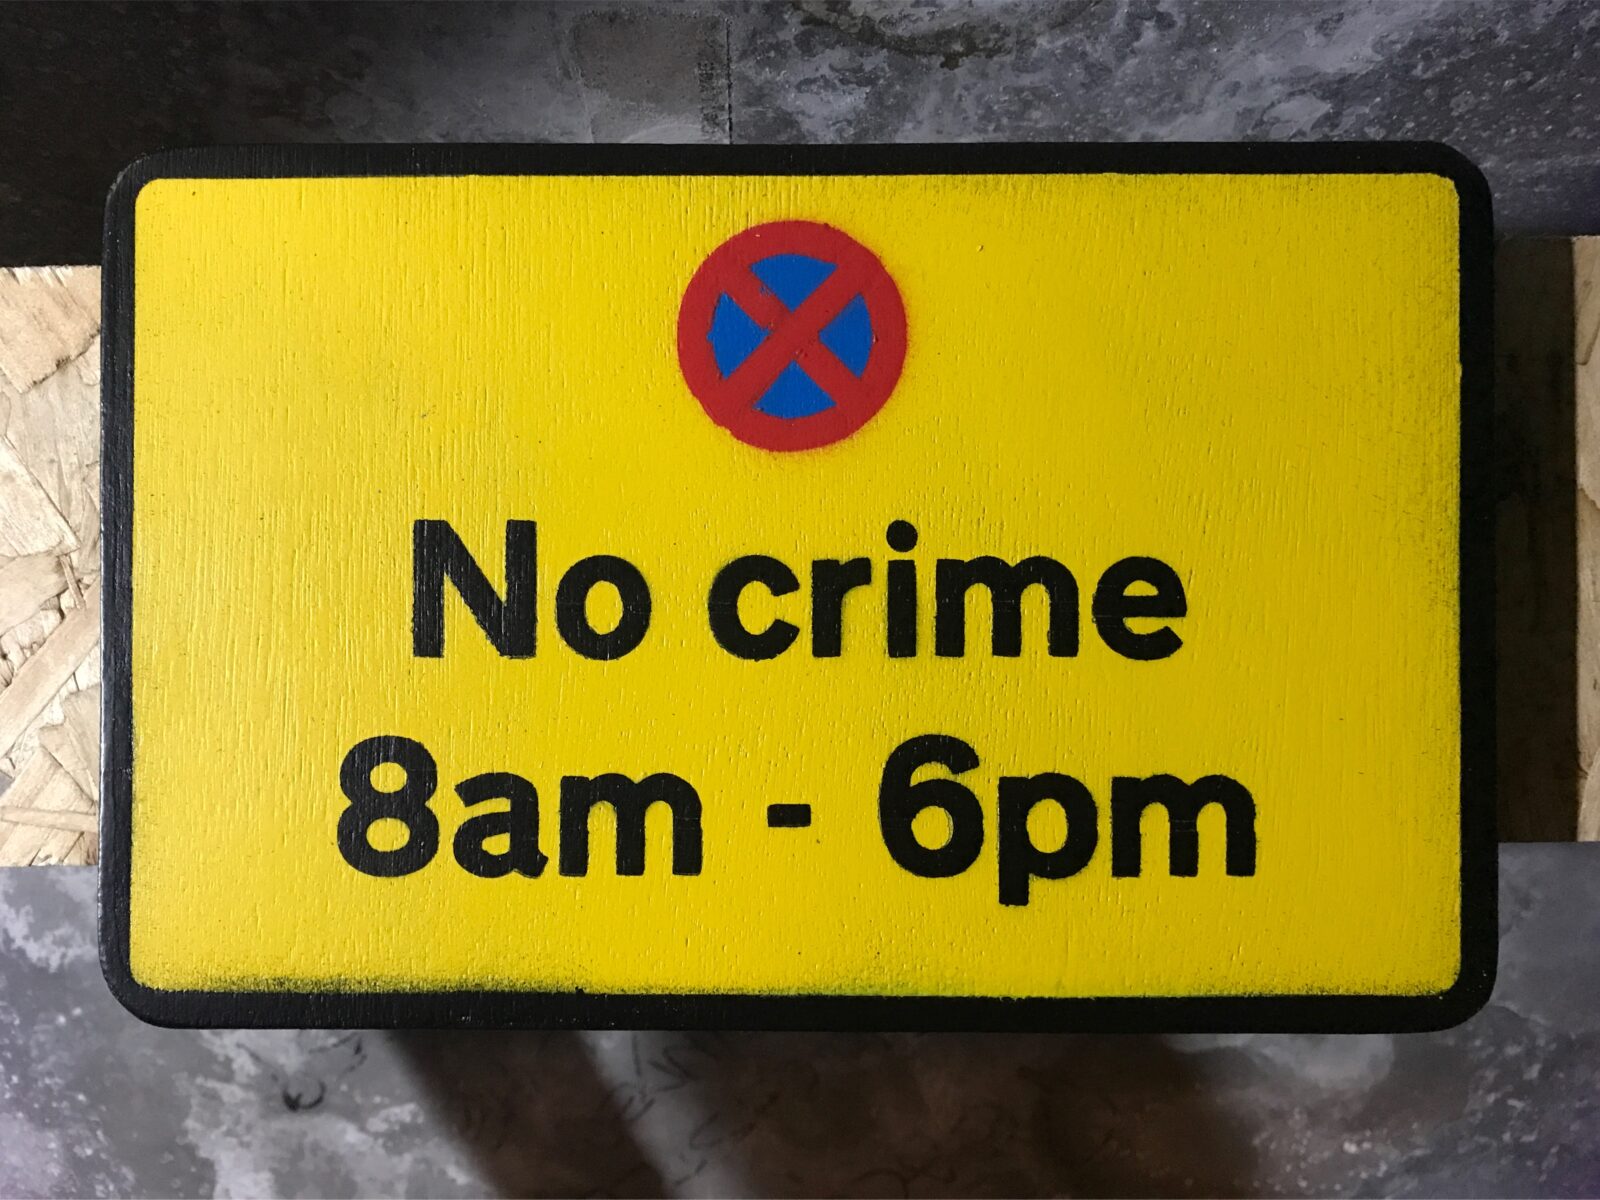 "No Crime 8am - 6pm" hand painted wooden road sign by Chu